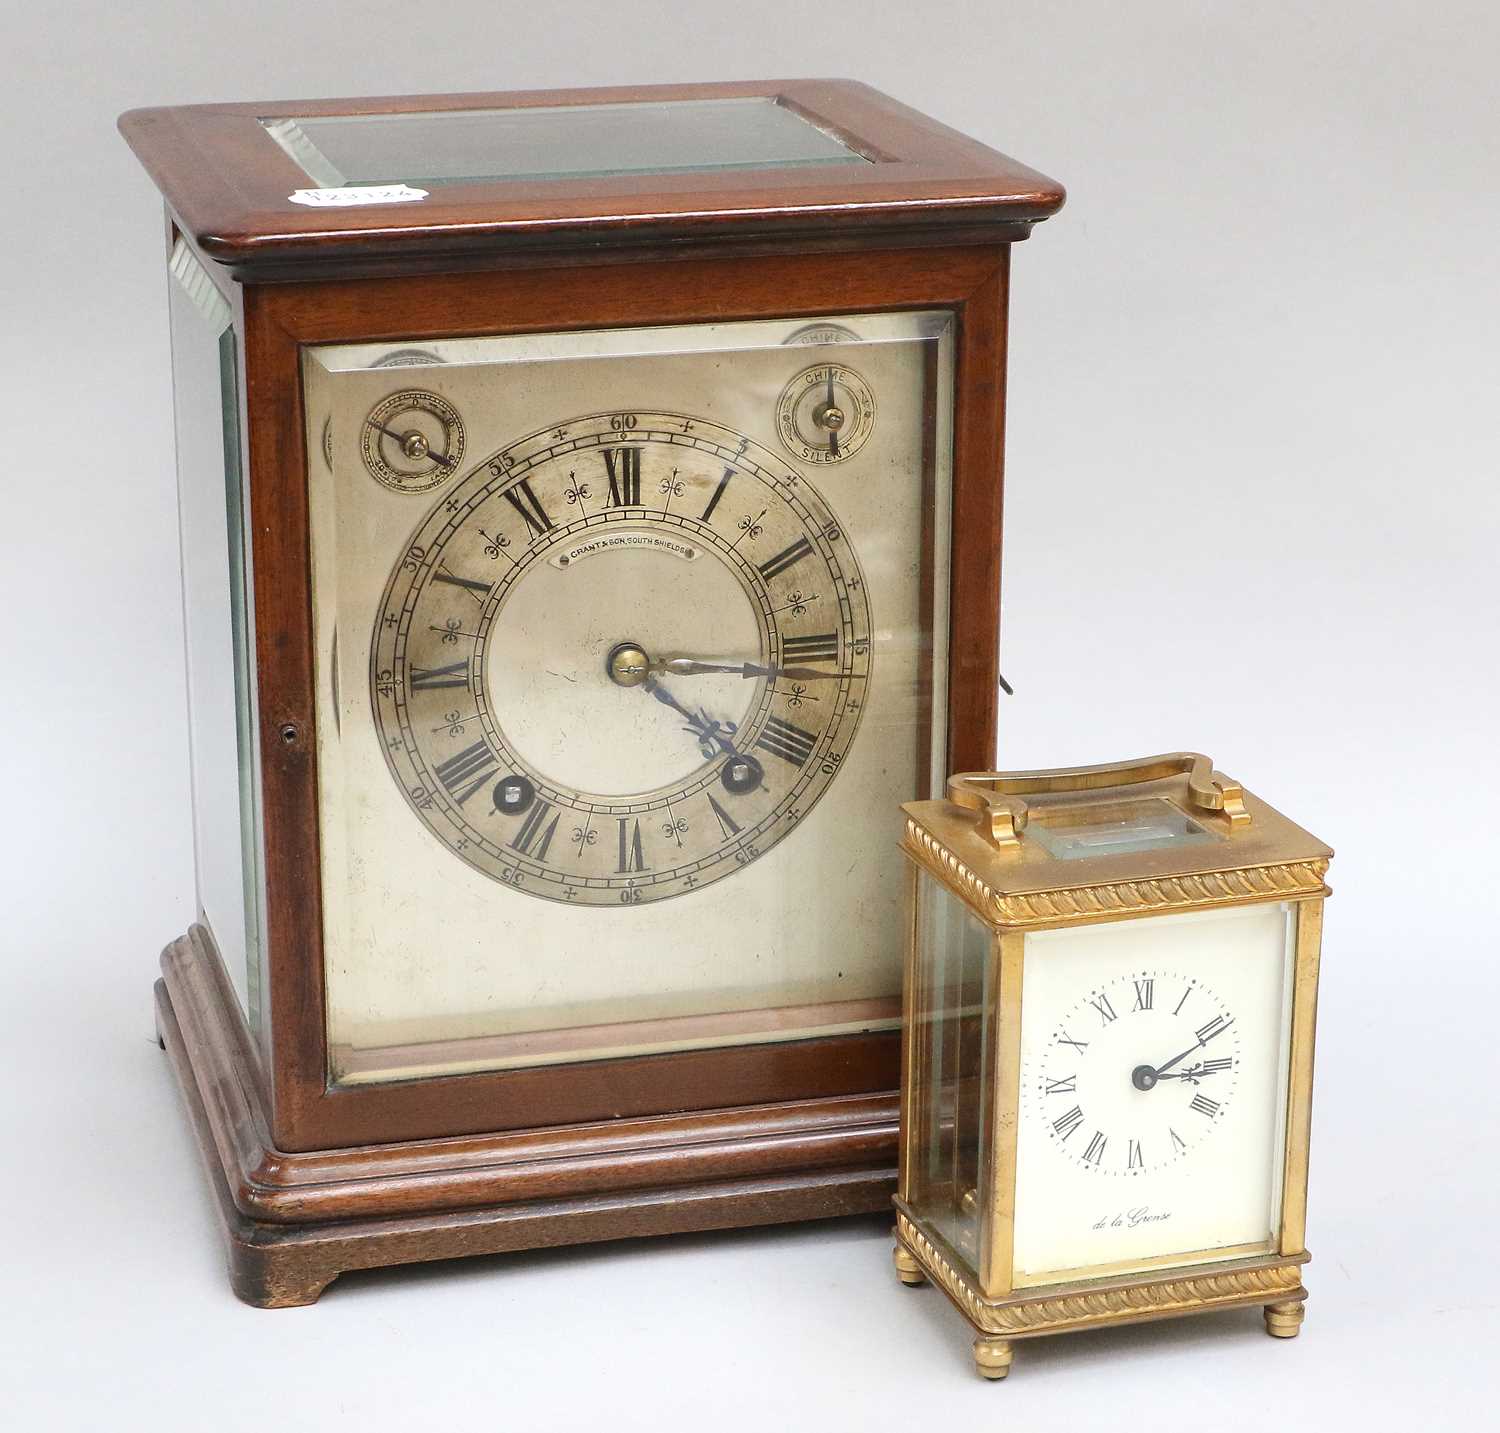 An Mahogany Cased Quarter Striking Mantel Clock, early 20th Century,the dial signed Grant & Son,